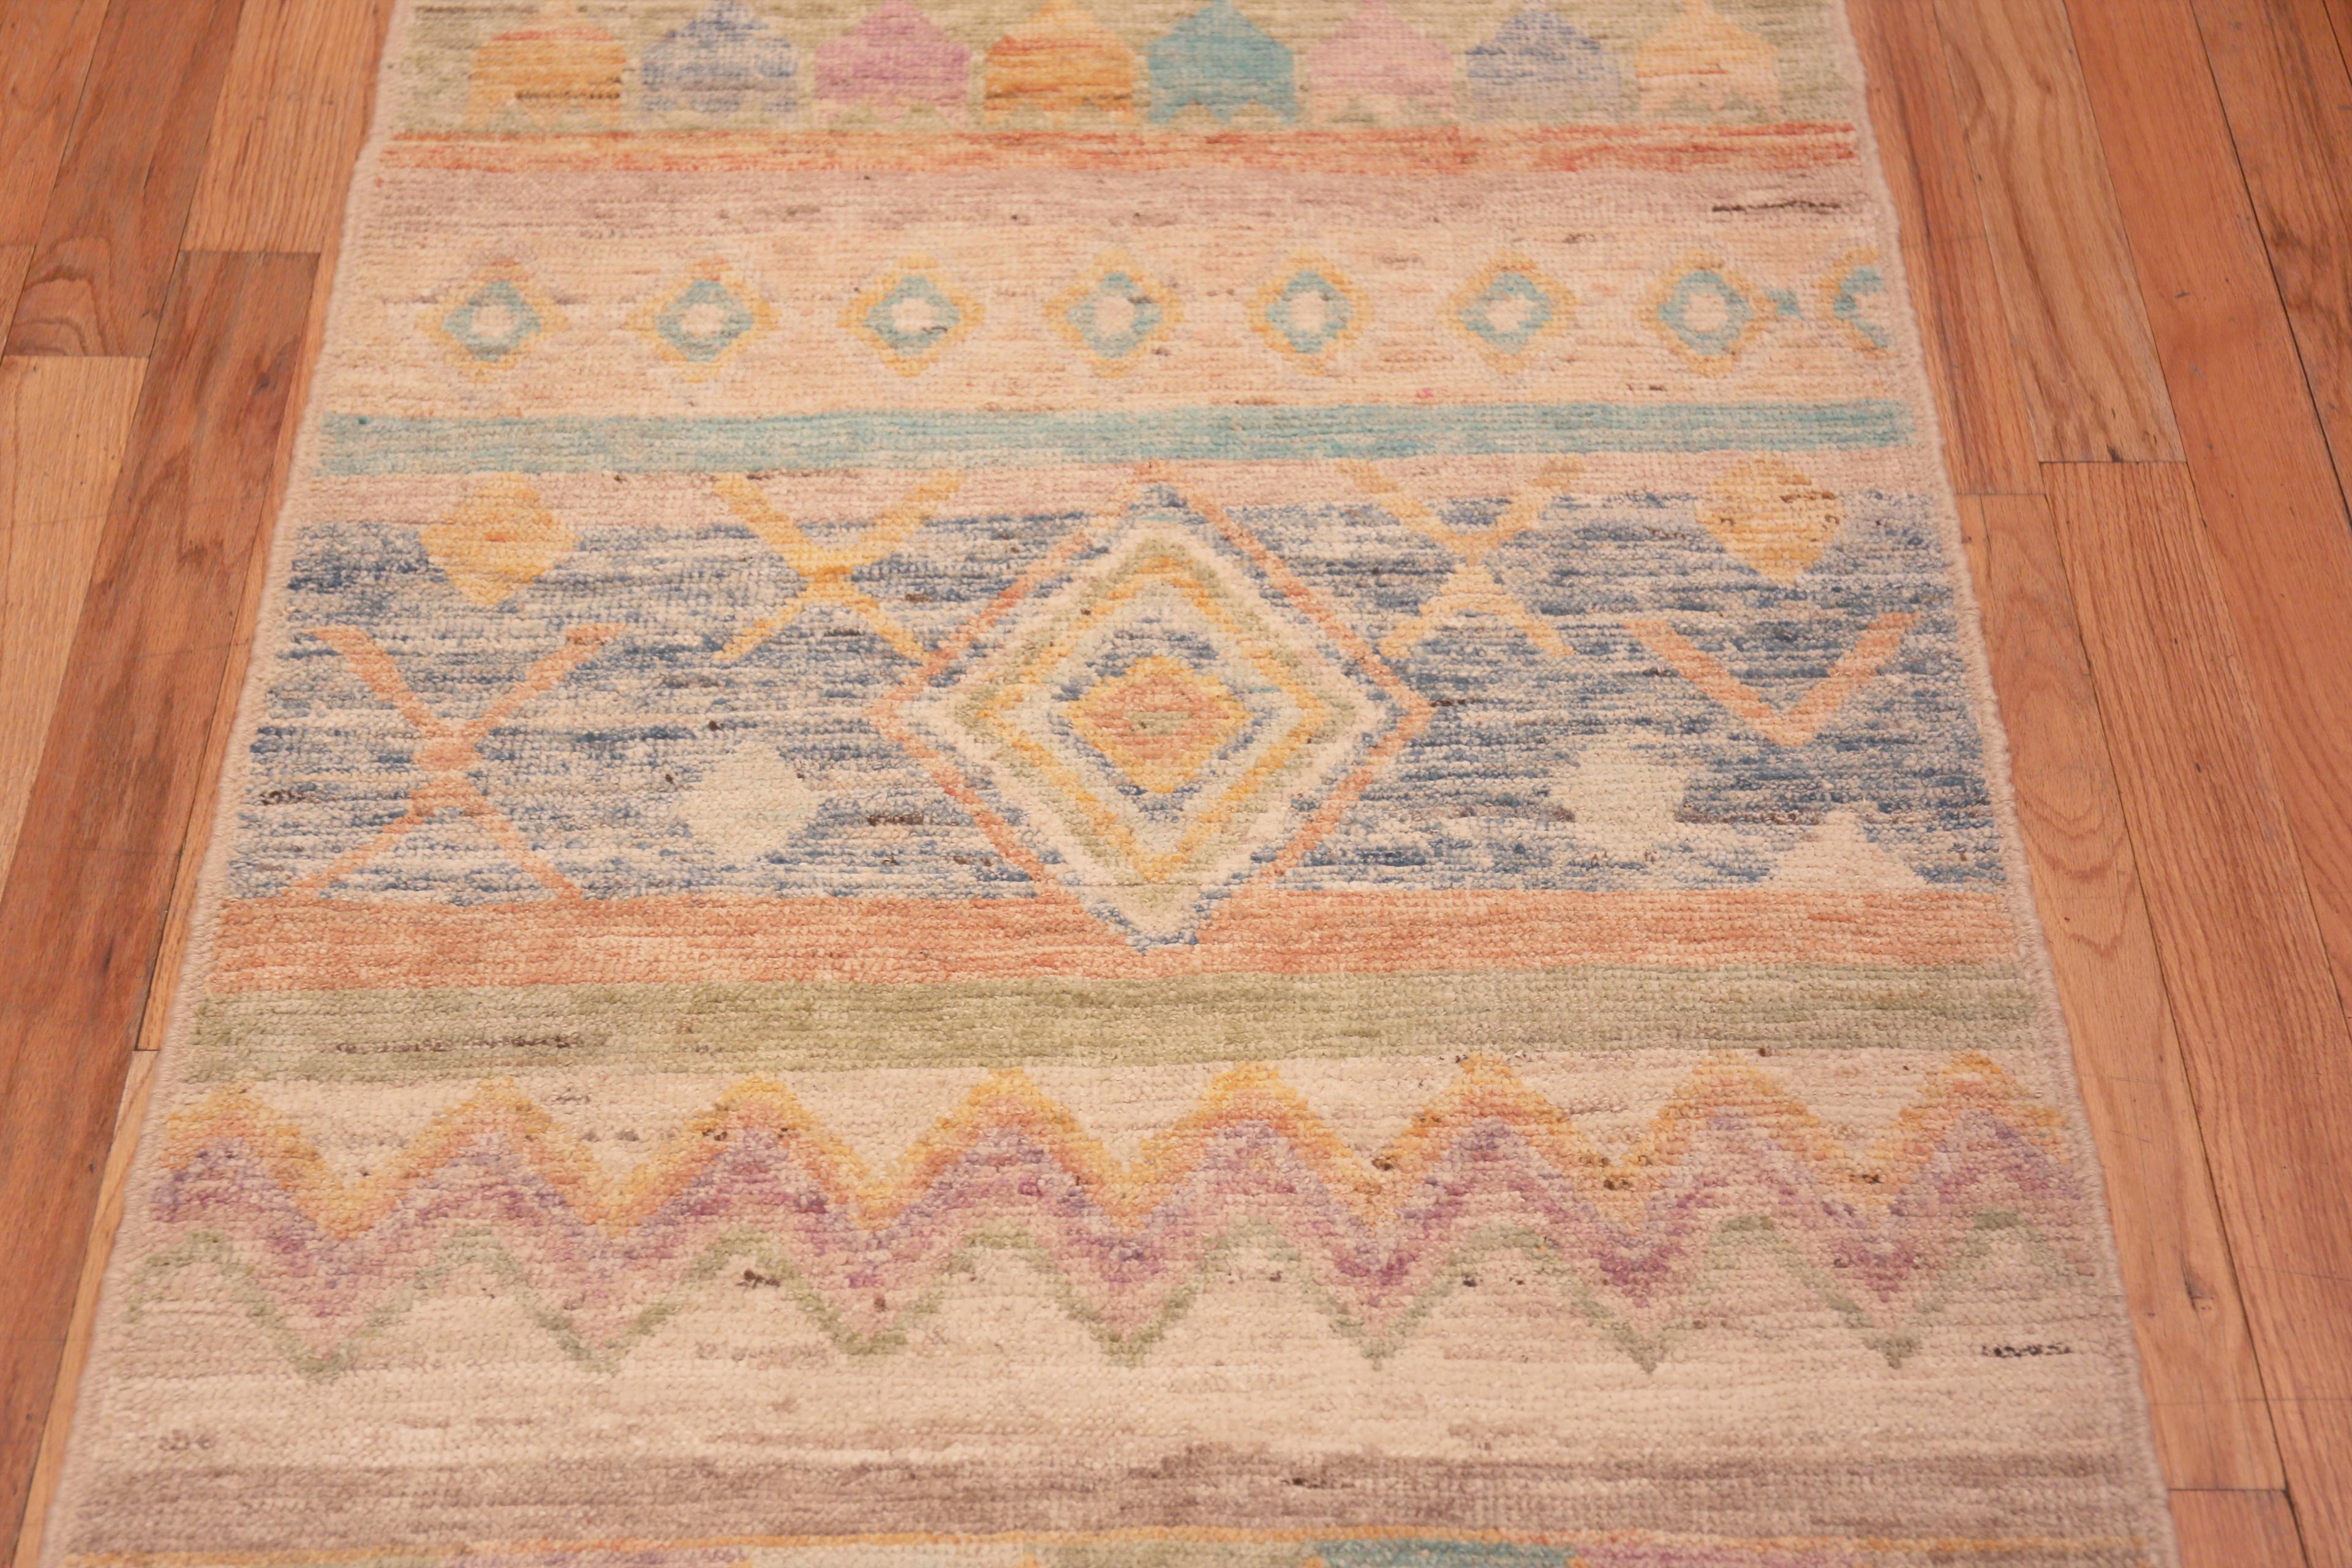 Hand-Knotted Nazmiyal Collection Rustic Tribal Geometric Modern Runner Rug 3' x 9'10